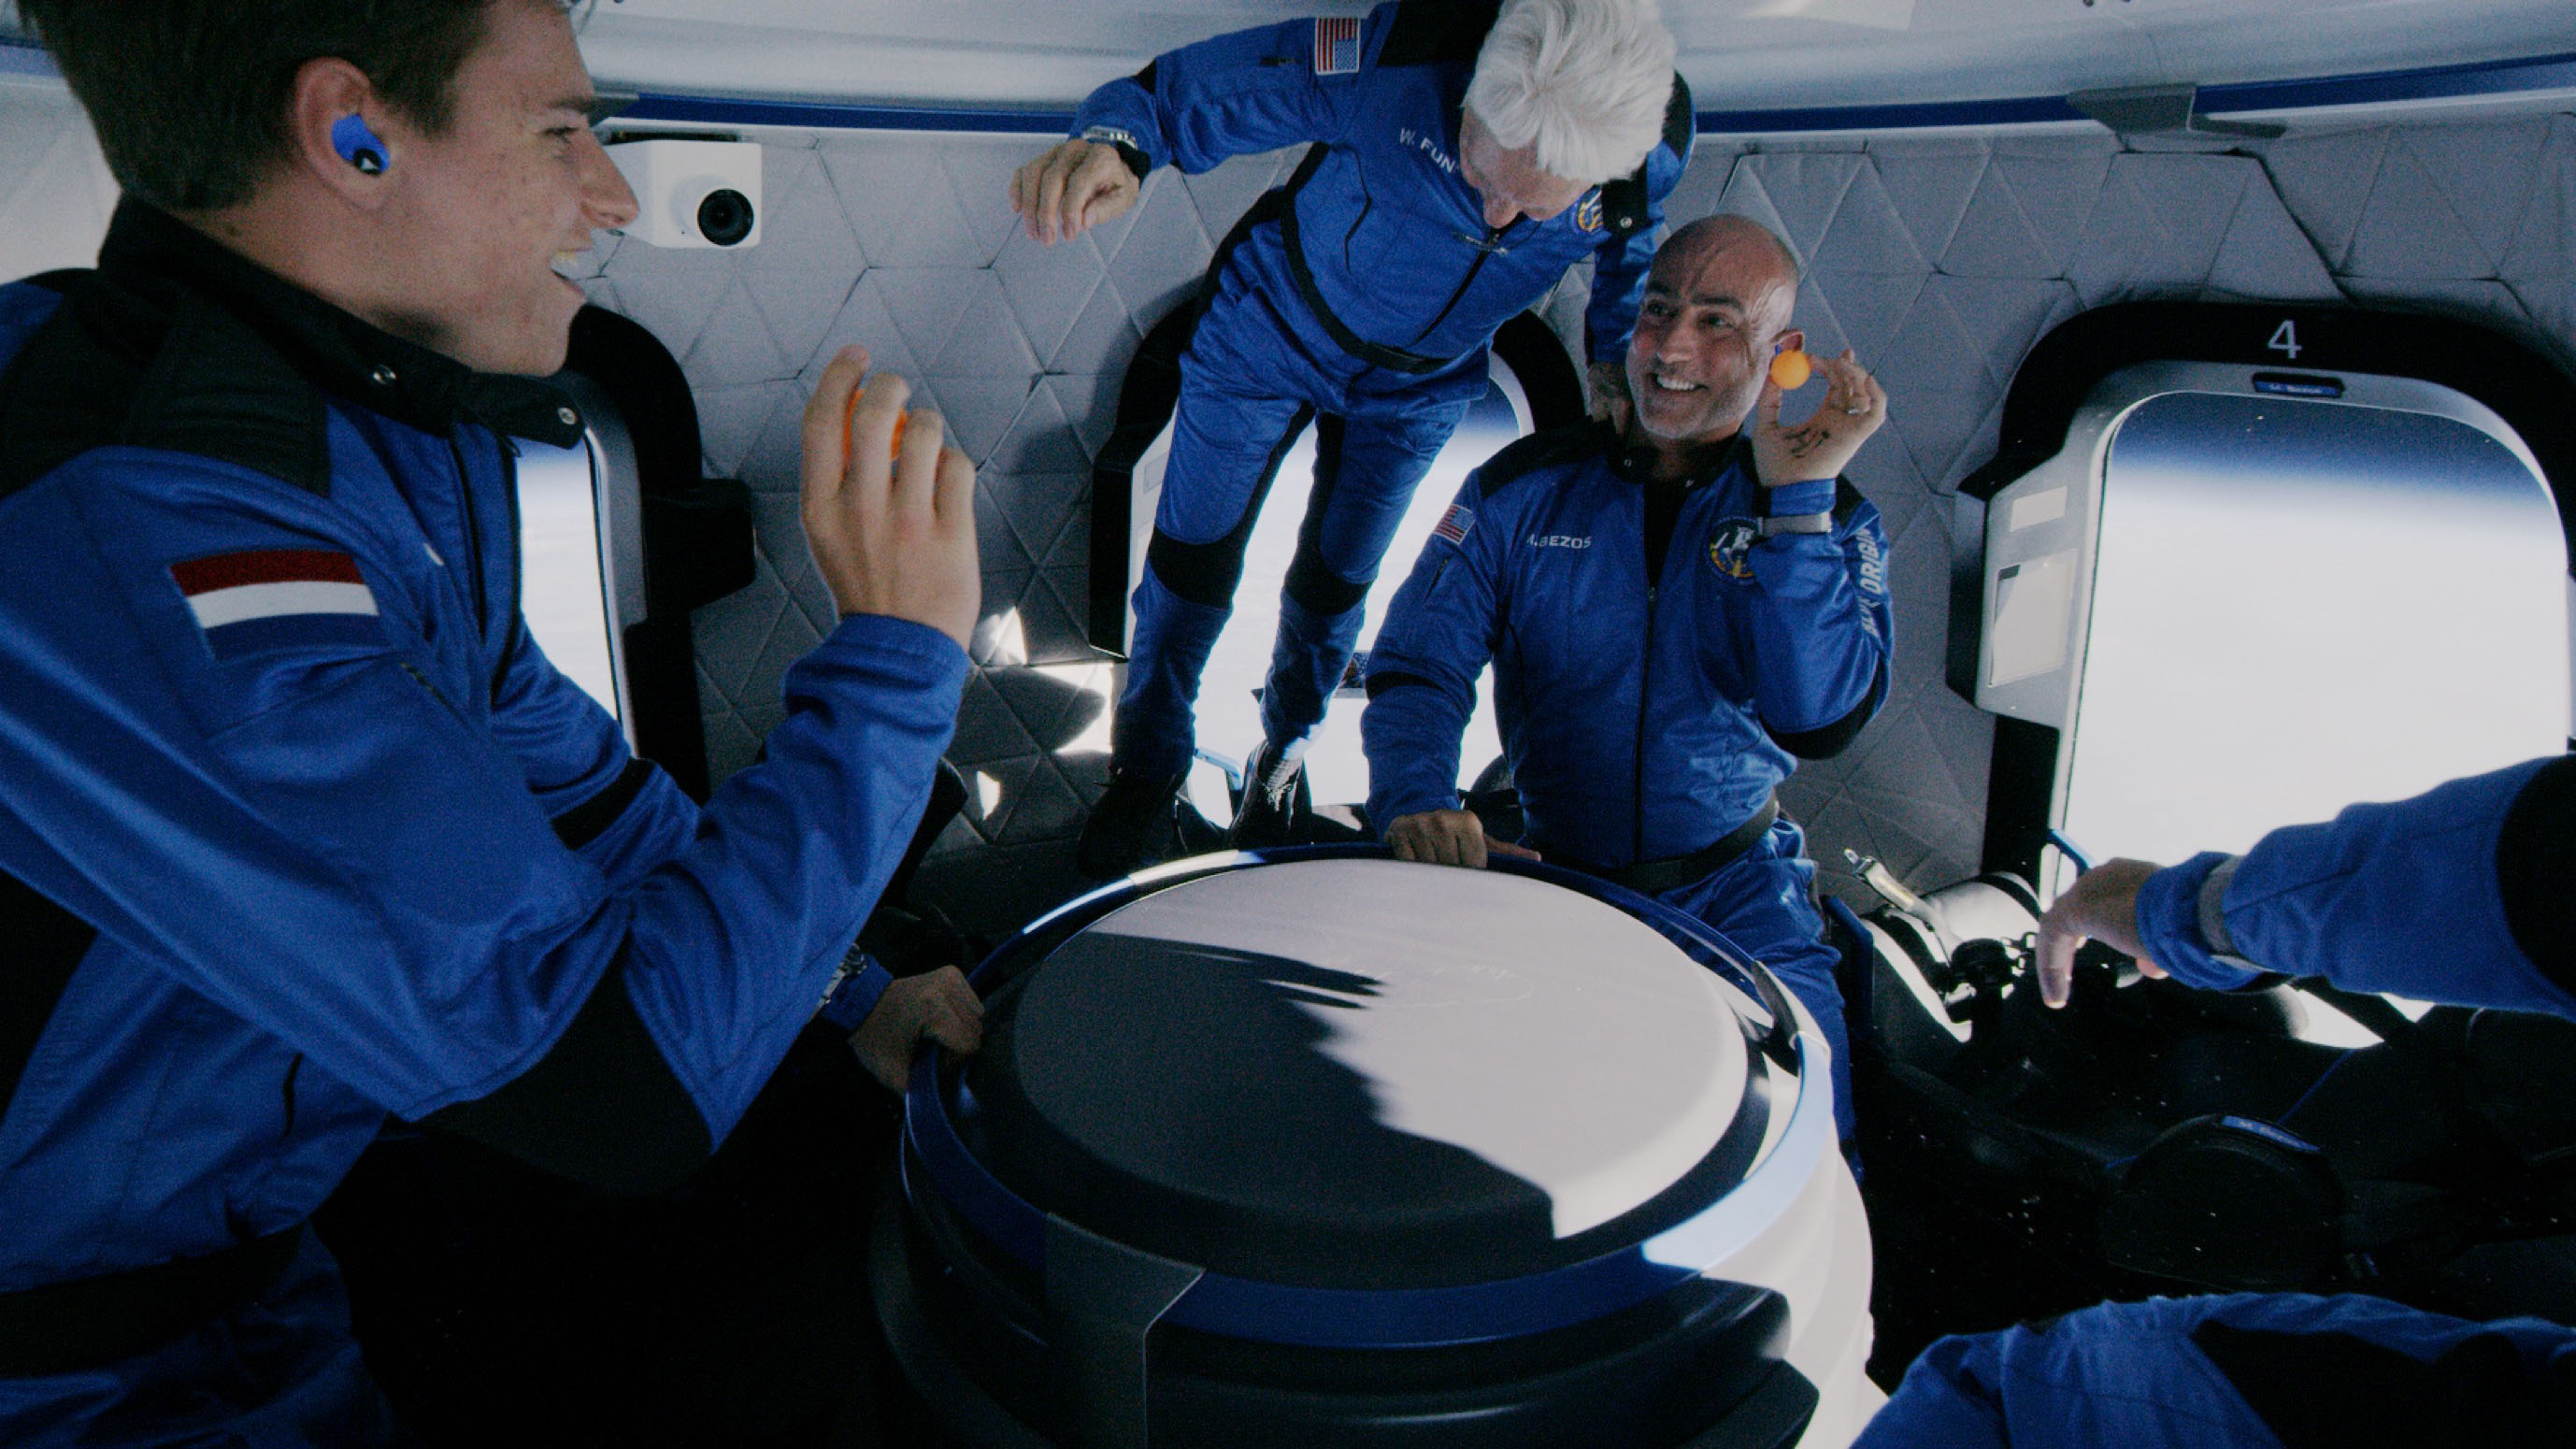 Wally Funk, Mark Bezos and Oliver Daemen enjoying themselves during the microgravity phase of Blue Origin's first crewed flight.